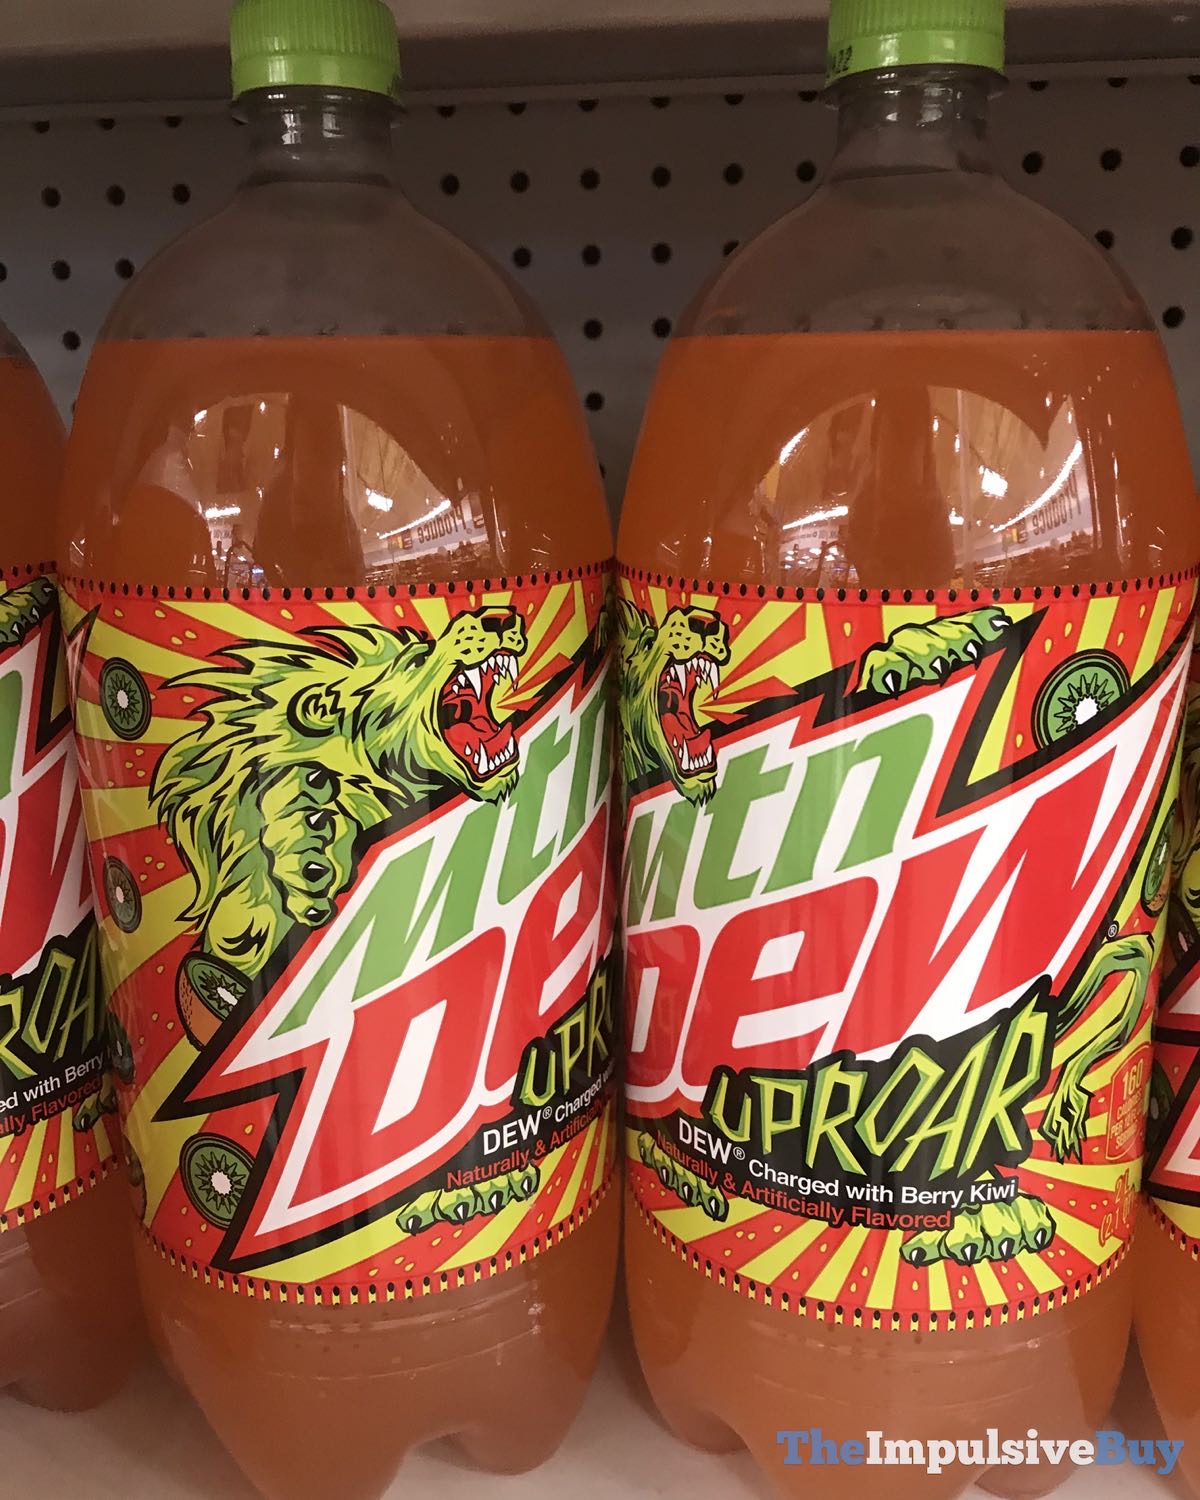 SPOTTED: Mtn Dew Uproar (Food Lion Exclusive) - The Impulsive Buy